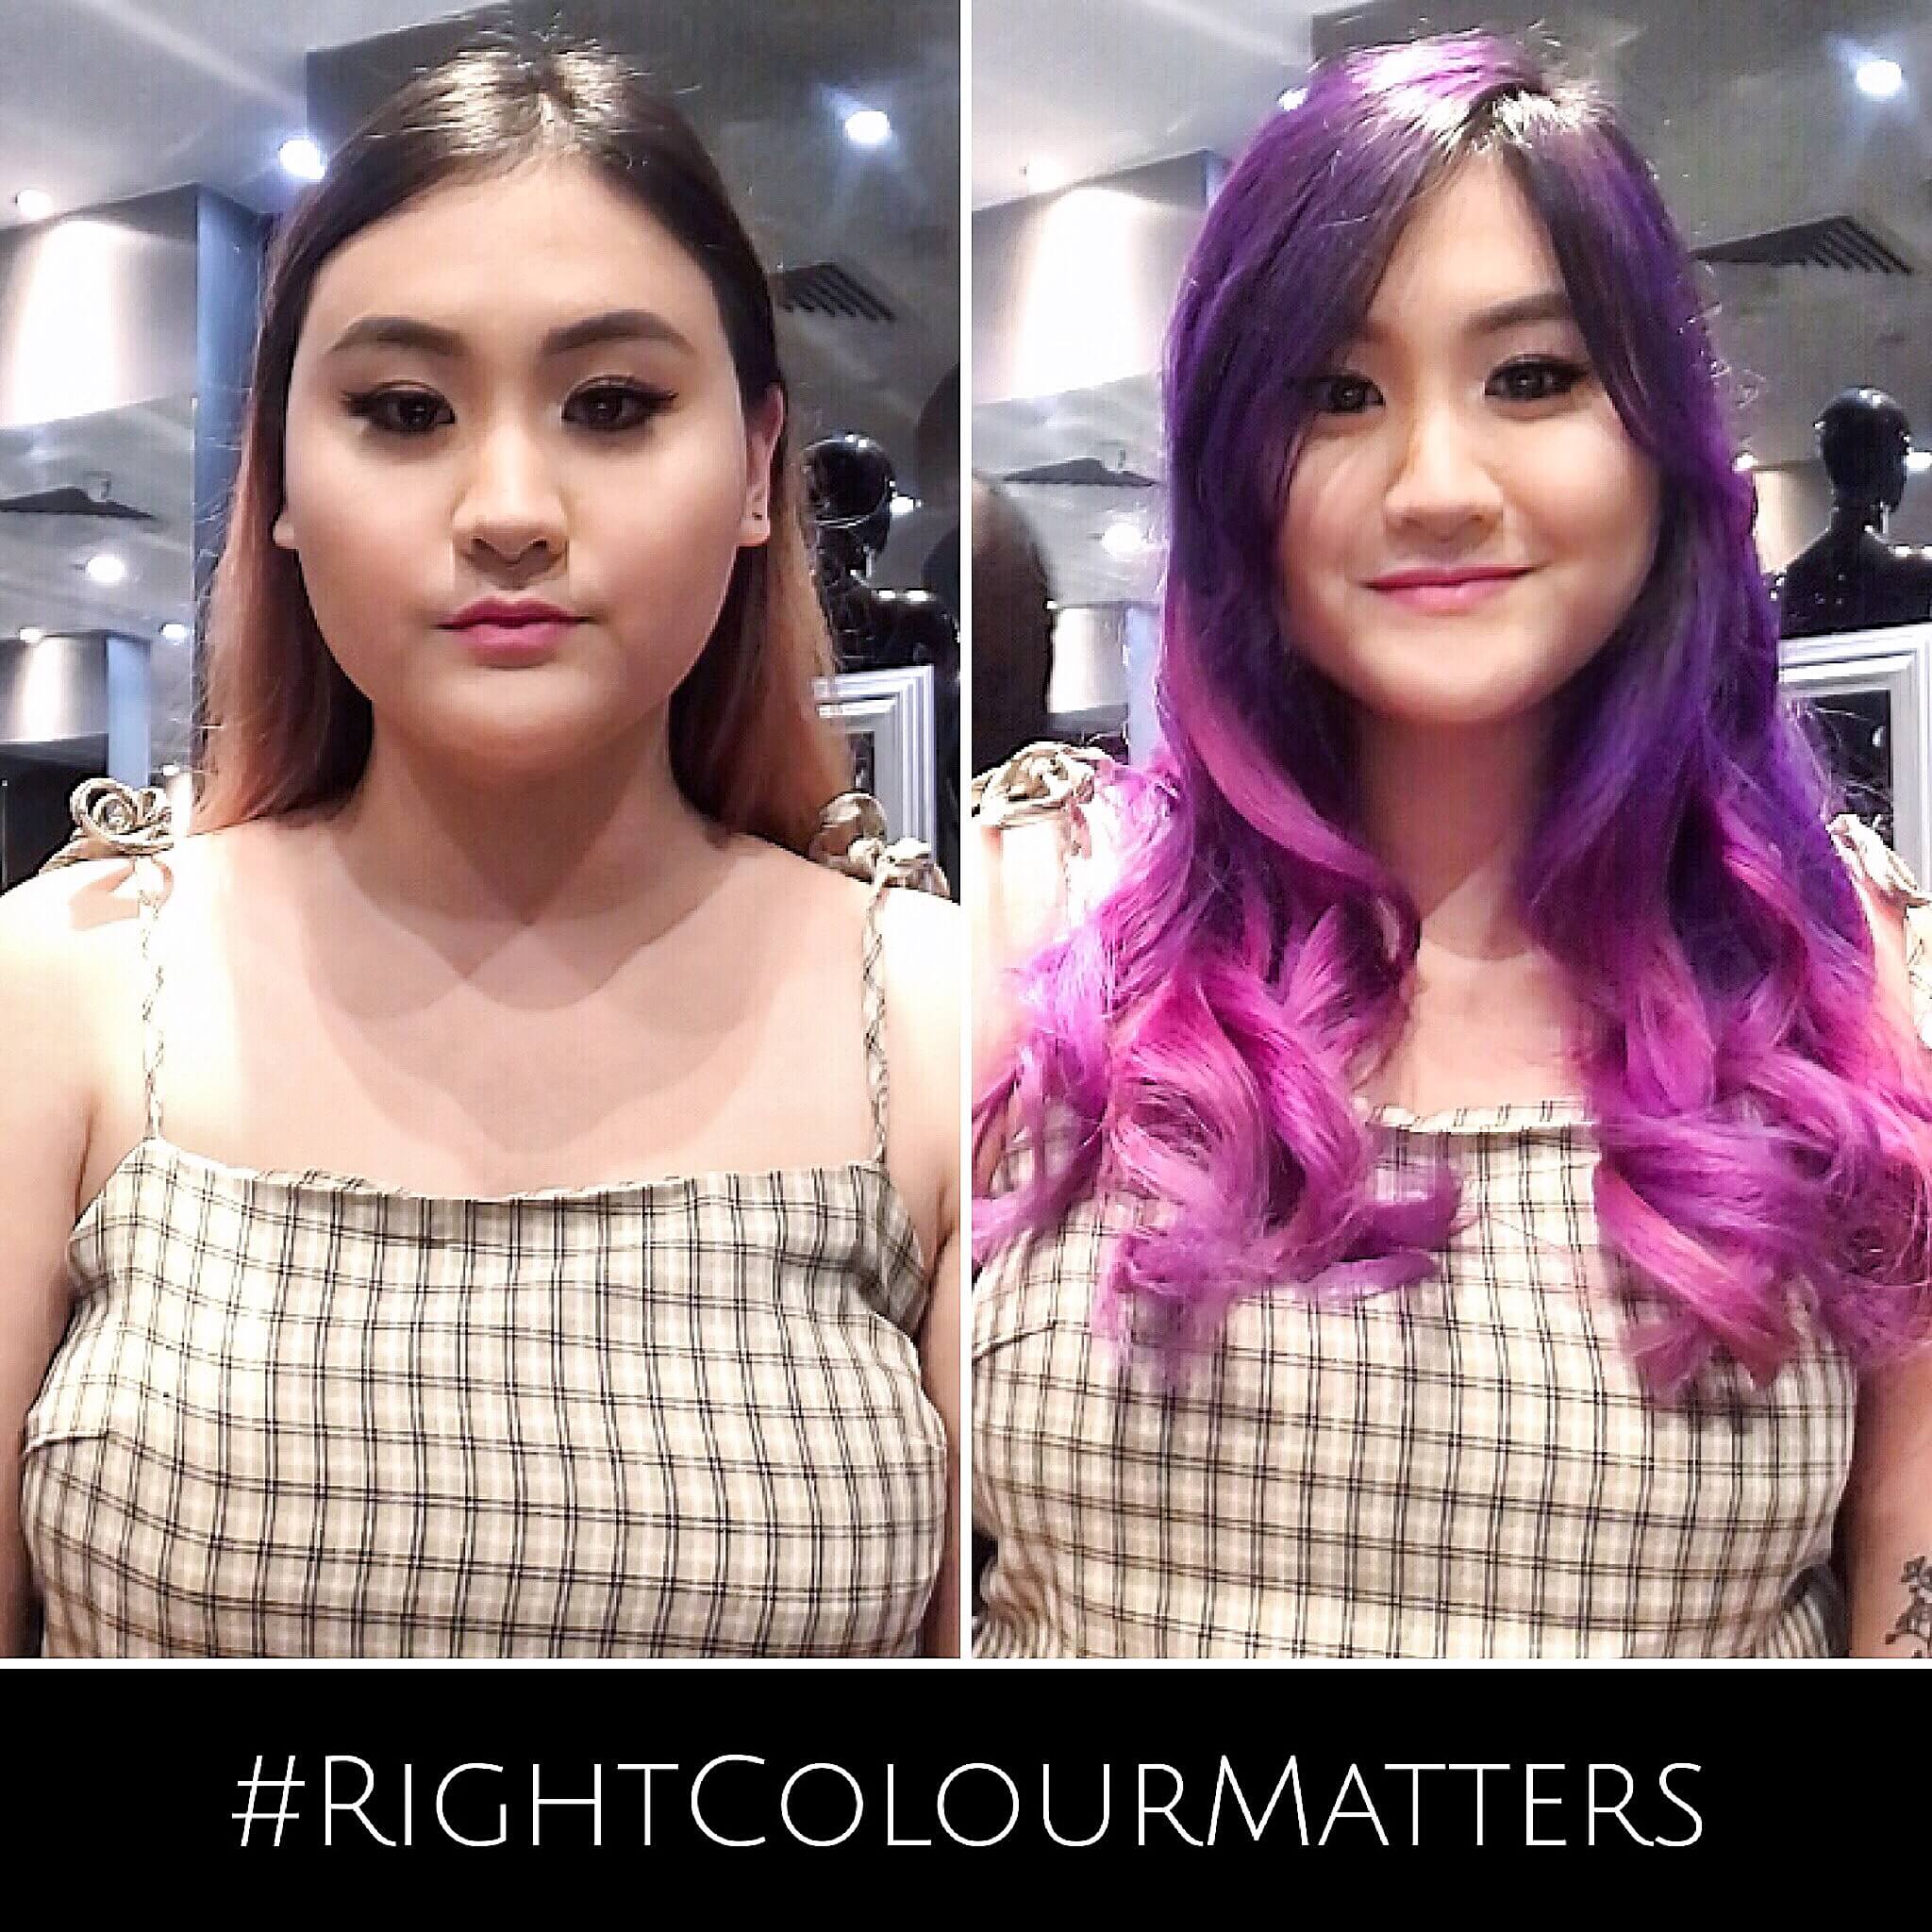 Melted Pagenta designed by Associate Director of Chez Vous Salon, Joyce Wan using #RightColourMatters diagnosis / Model: Shania